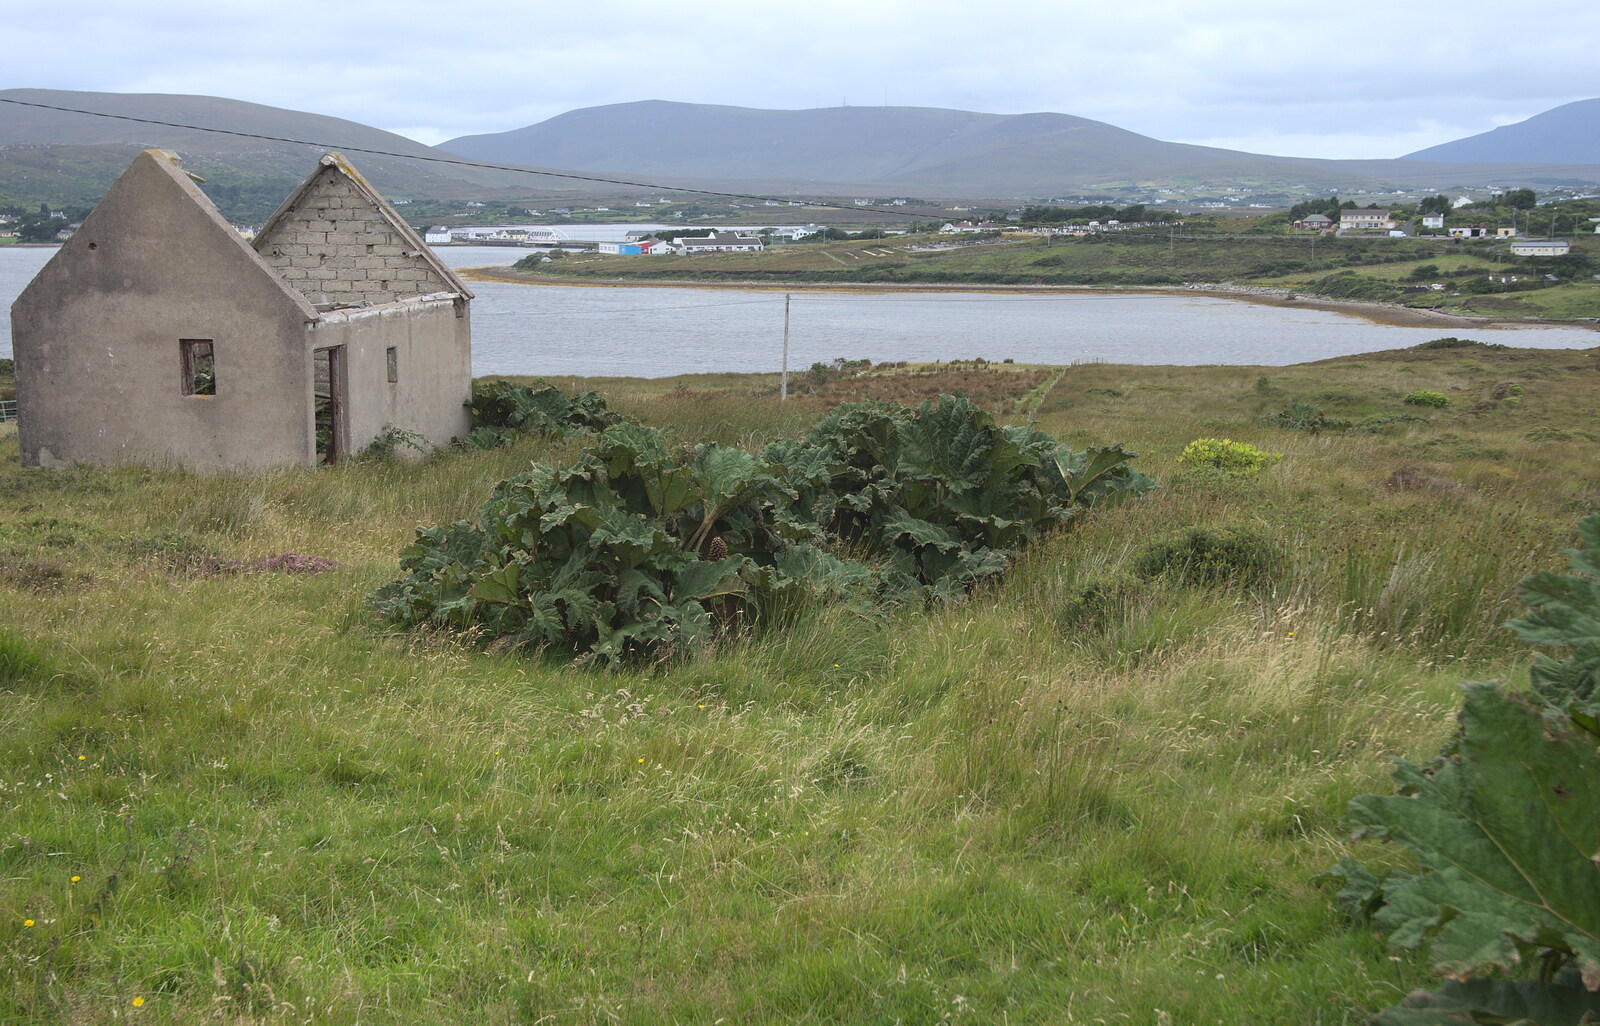 An out-house has lost its roof from From Achill to Strokestown, Mayo and Roscommon, Ireland - 10th August 2017